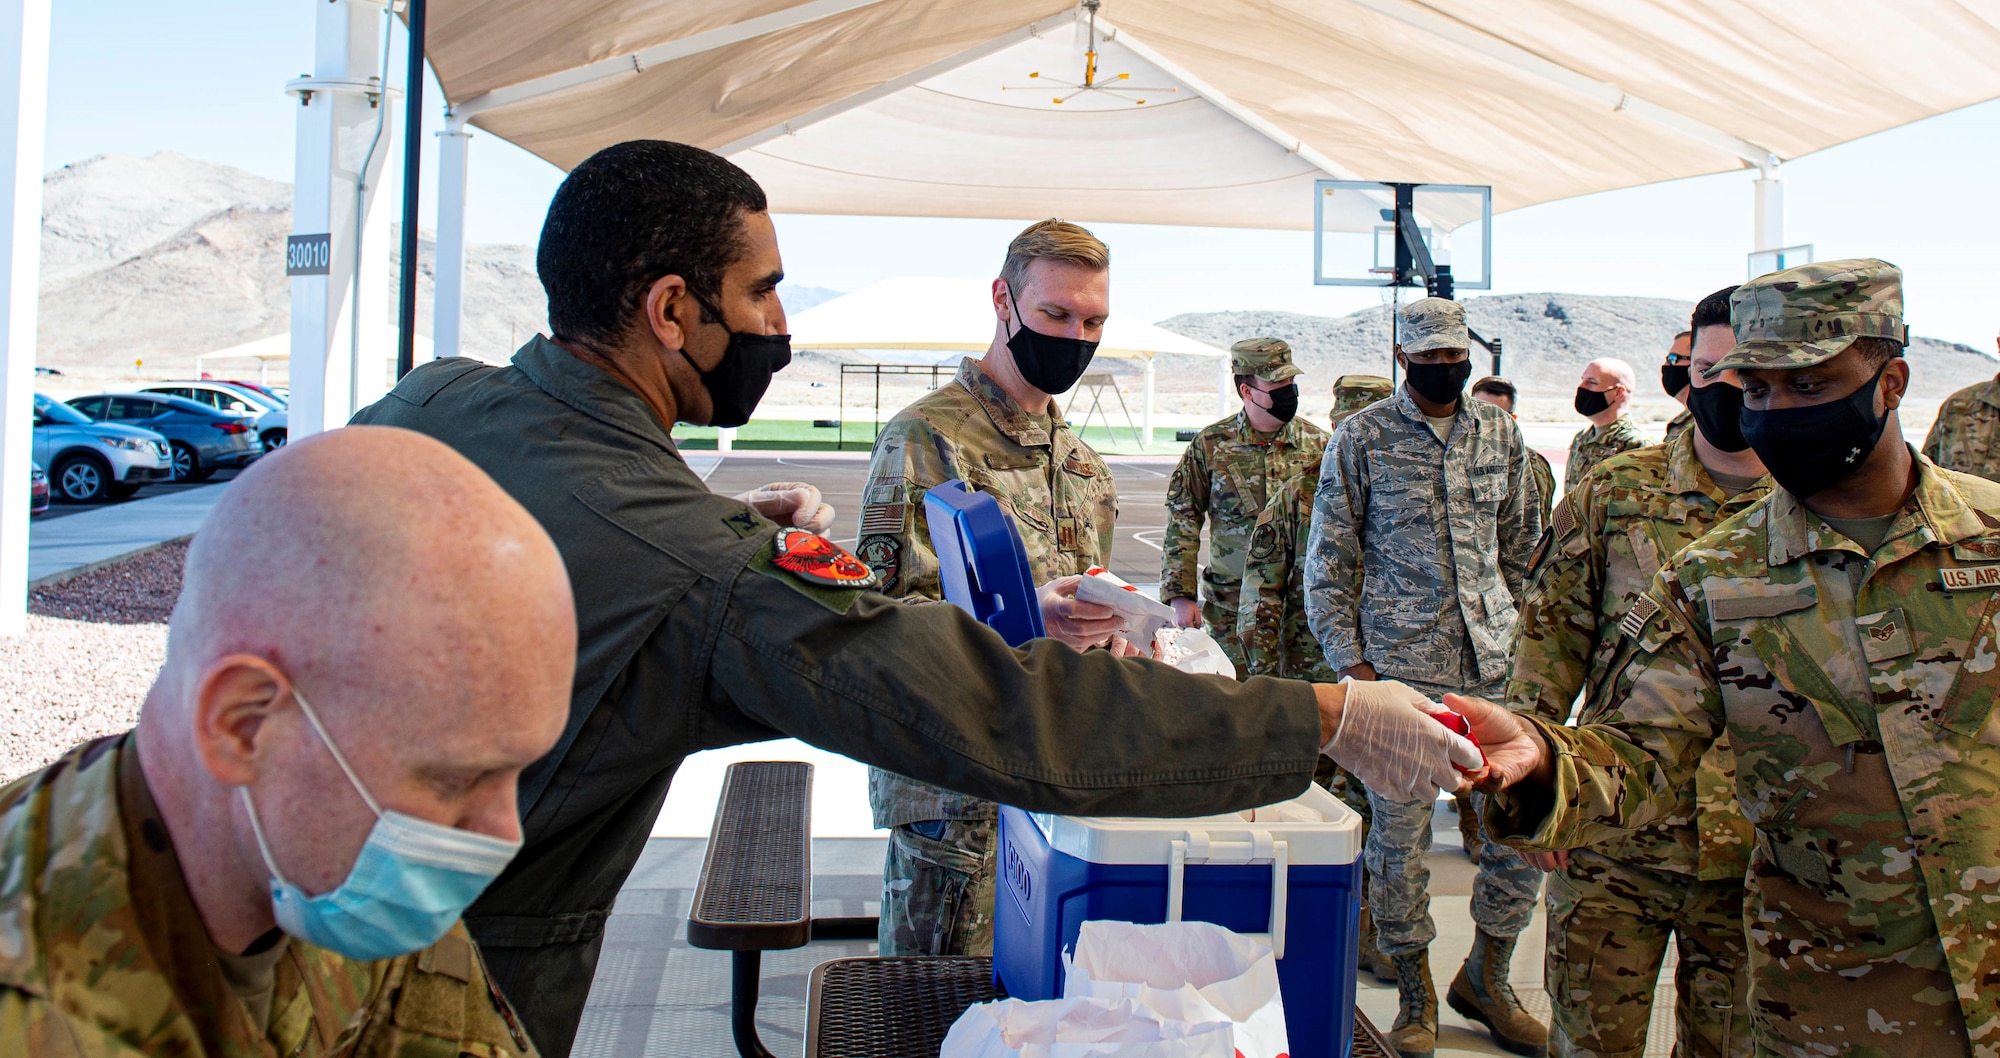 Male Colonel hands a sandwich to military members standing in a line in an outdoor park bench seating area.